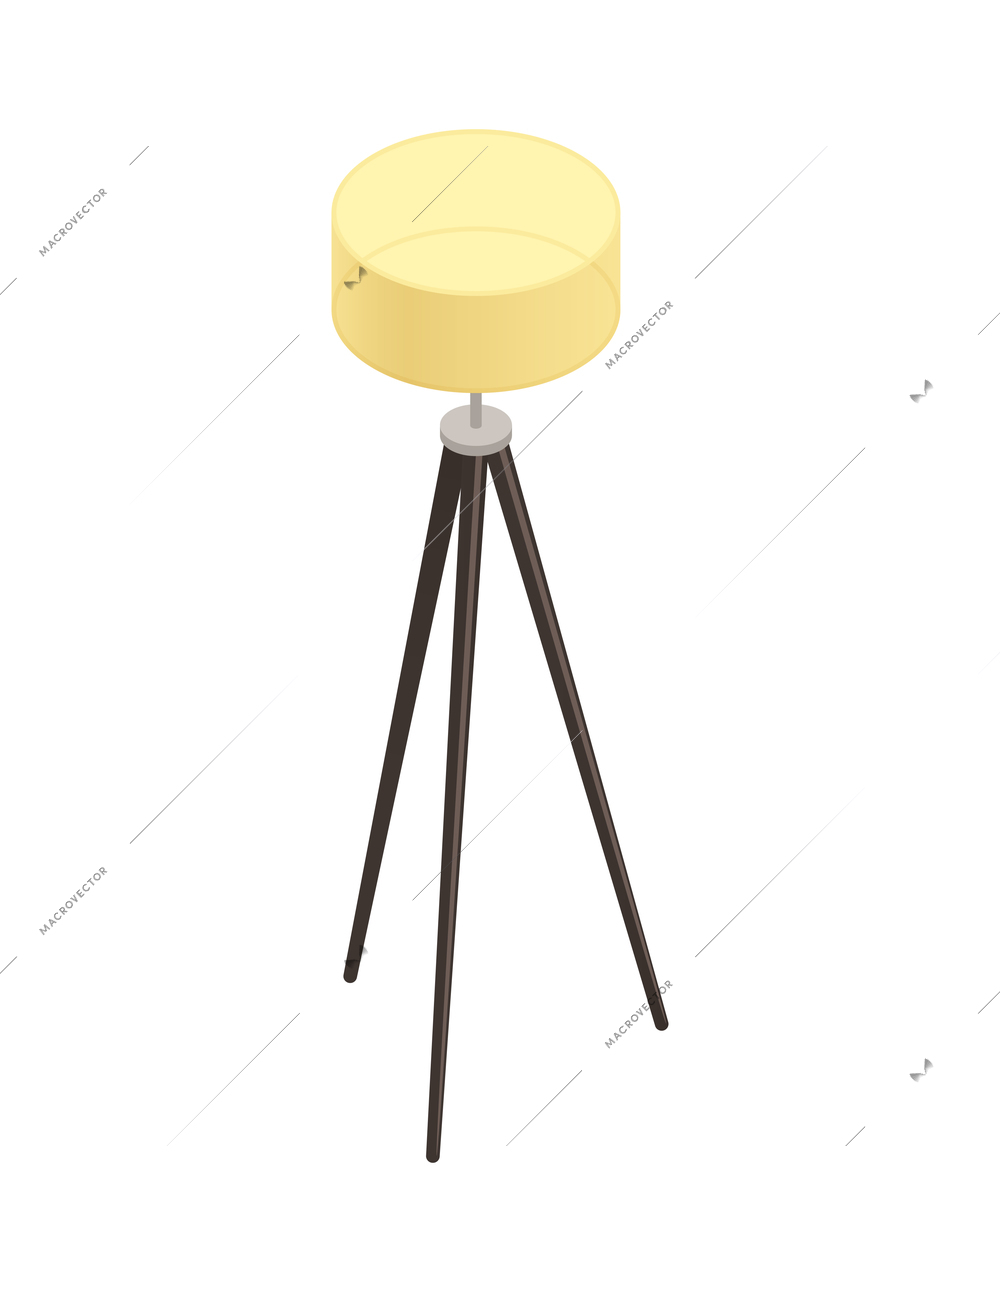 Isometric icon with standard lamp in loft style on white background vector illustration